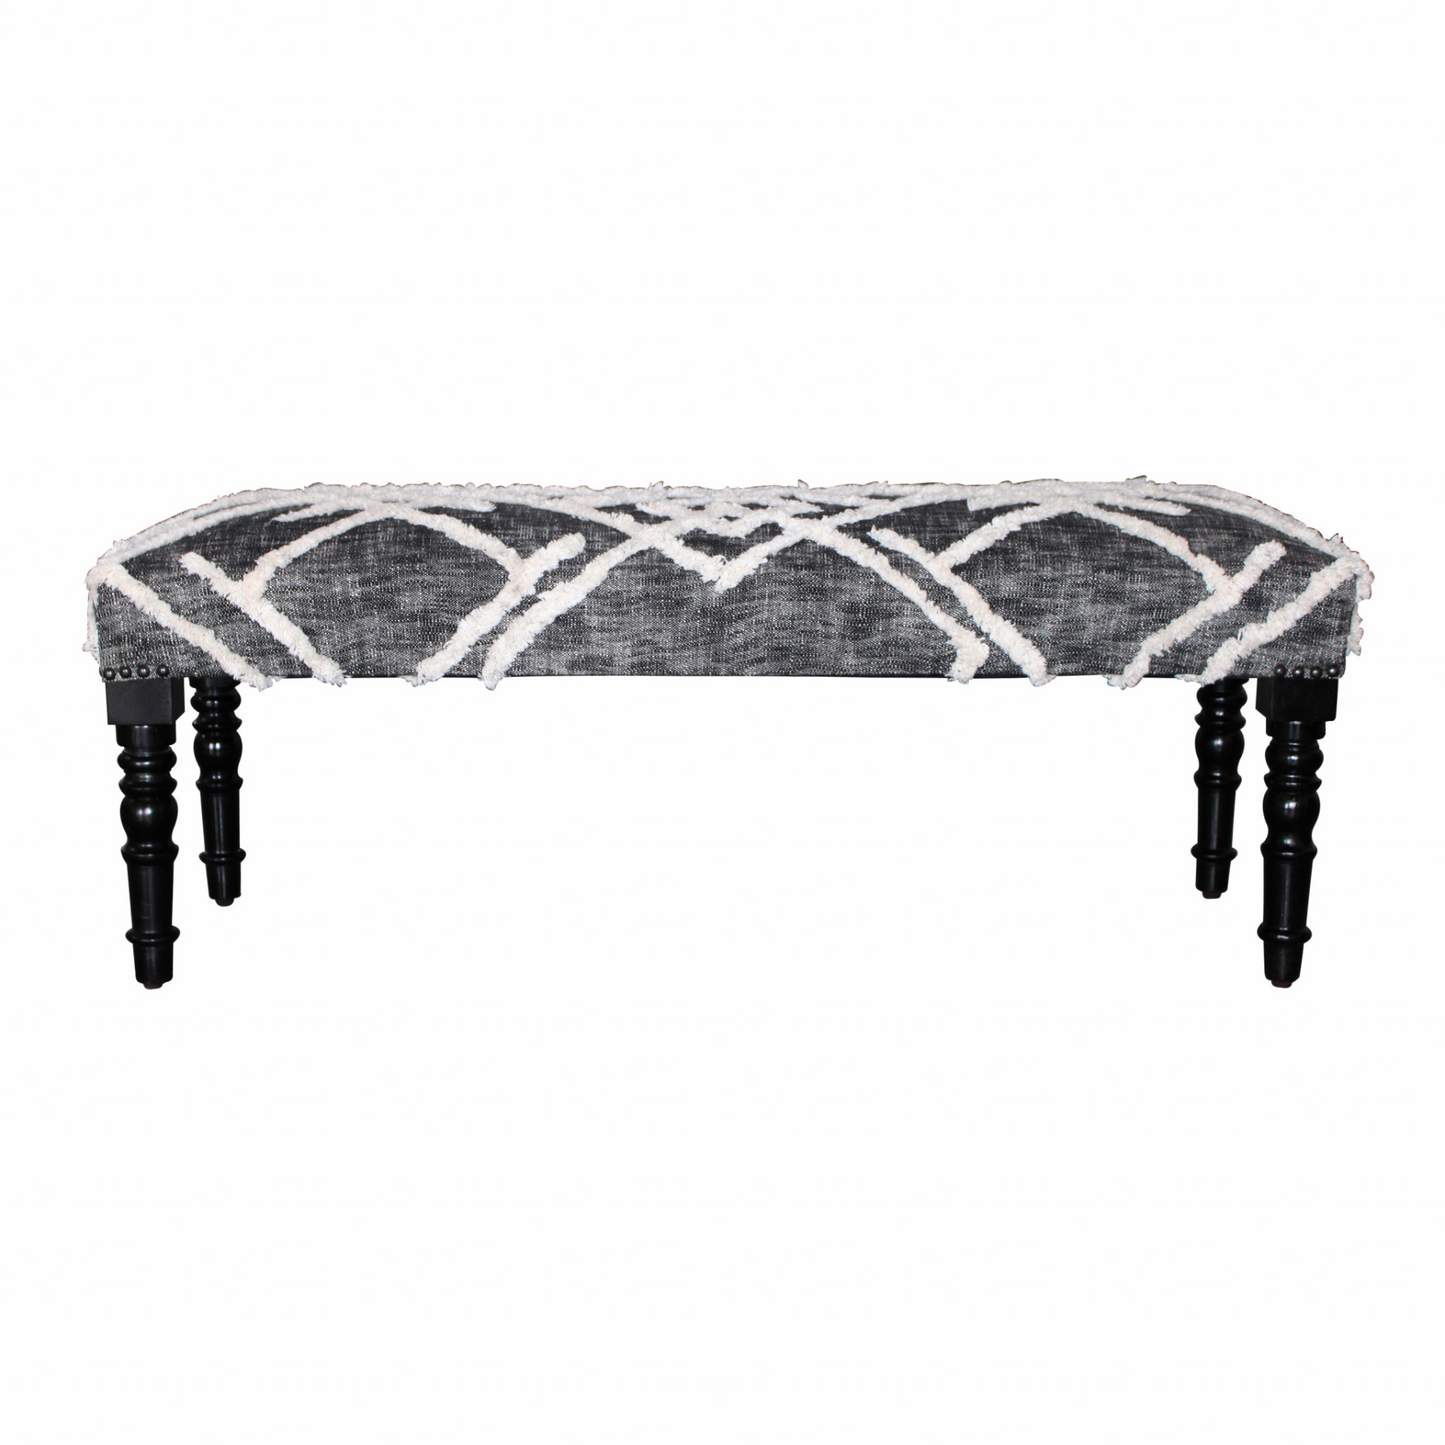 "47"" Gray And White Geometric Cotton Upholstered Distressed Bench"